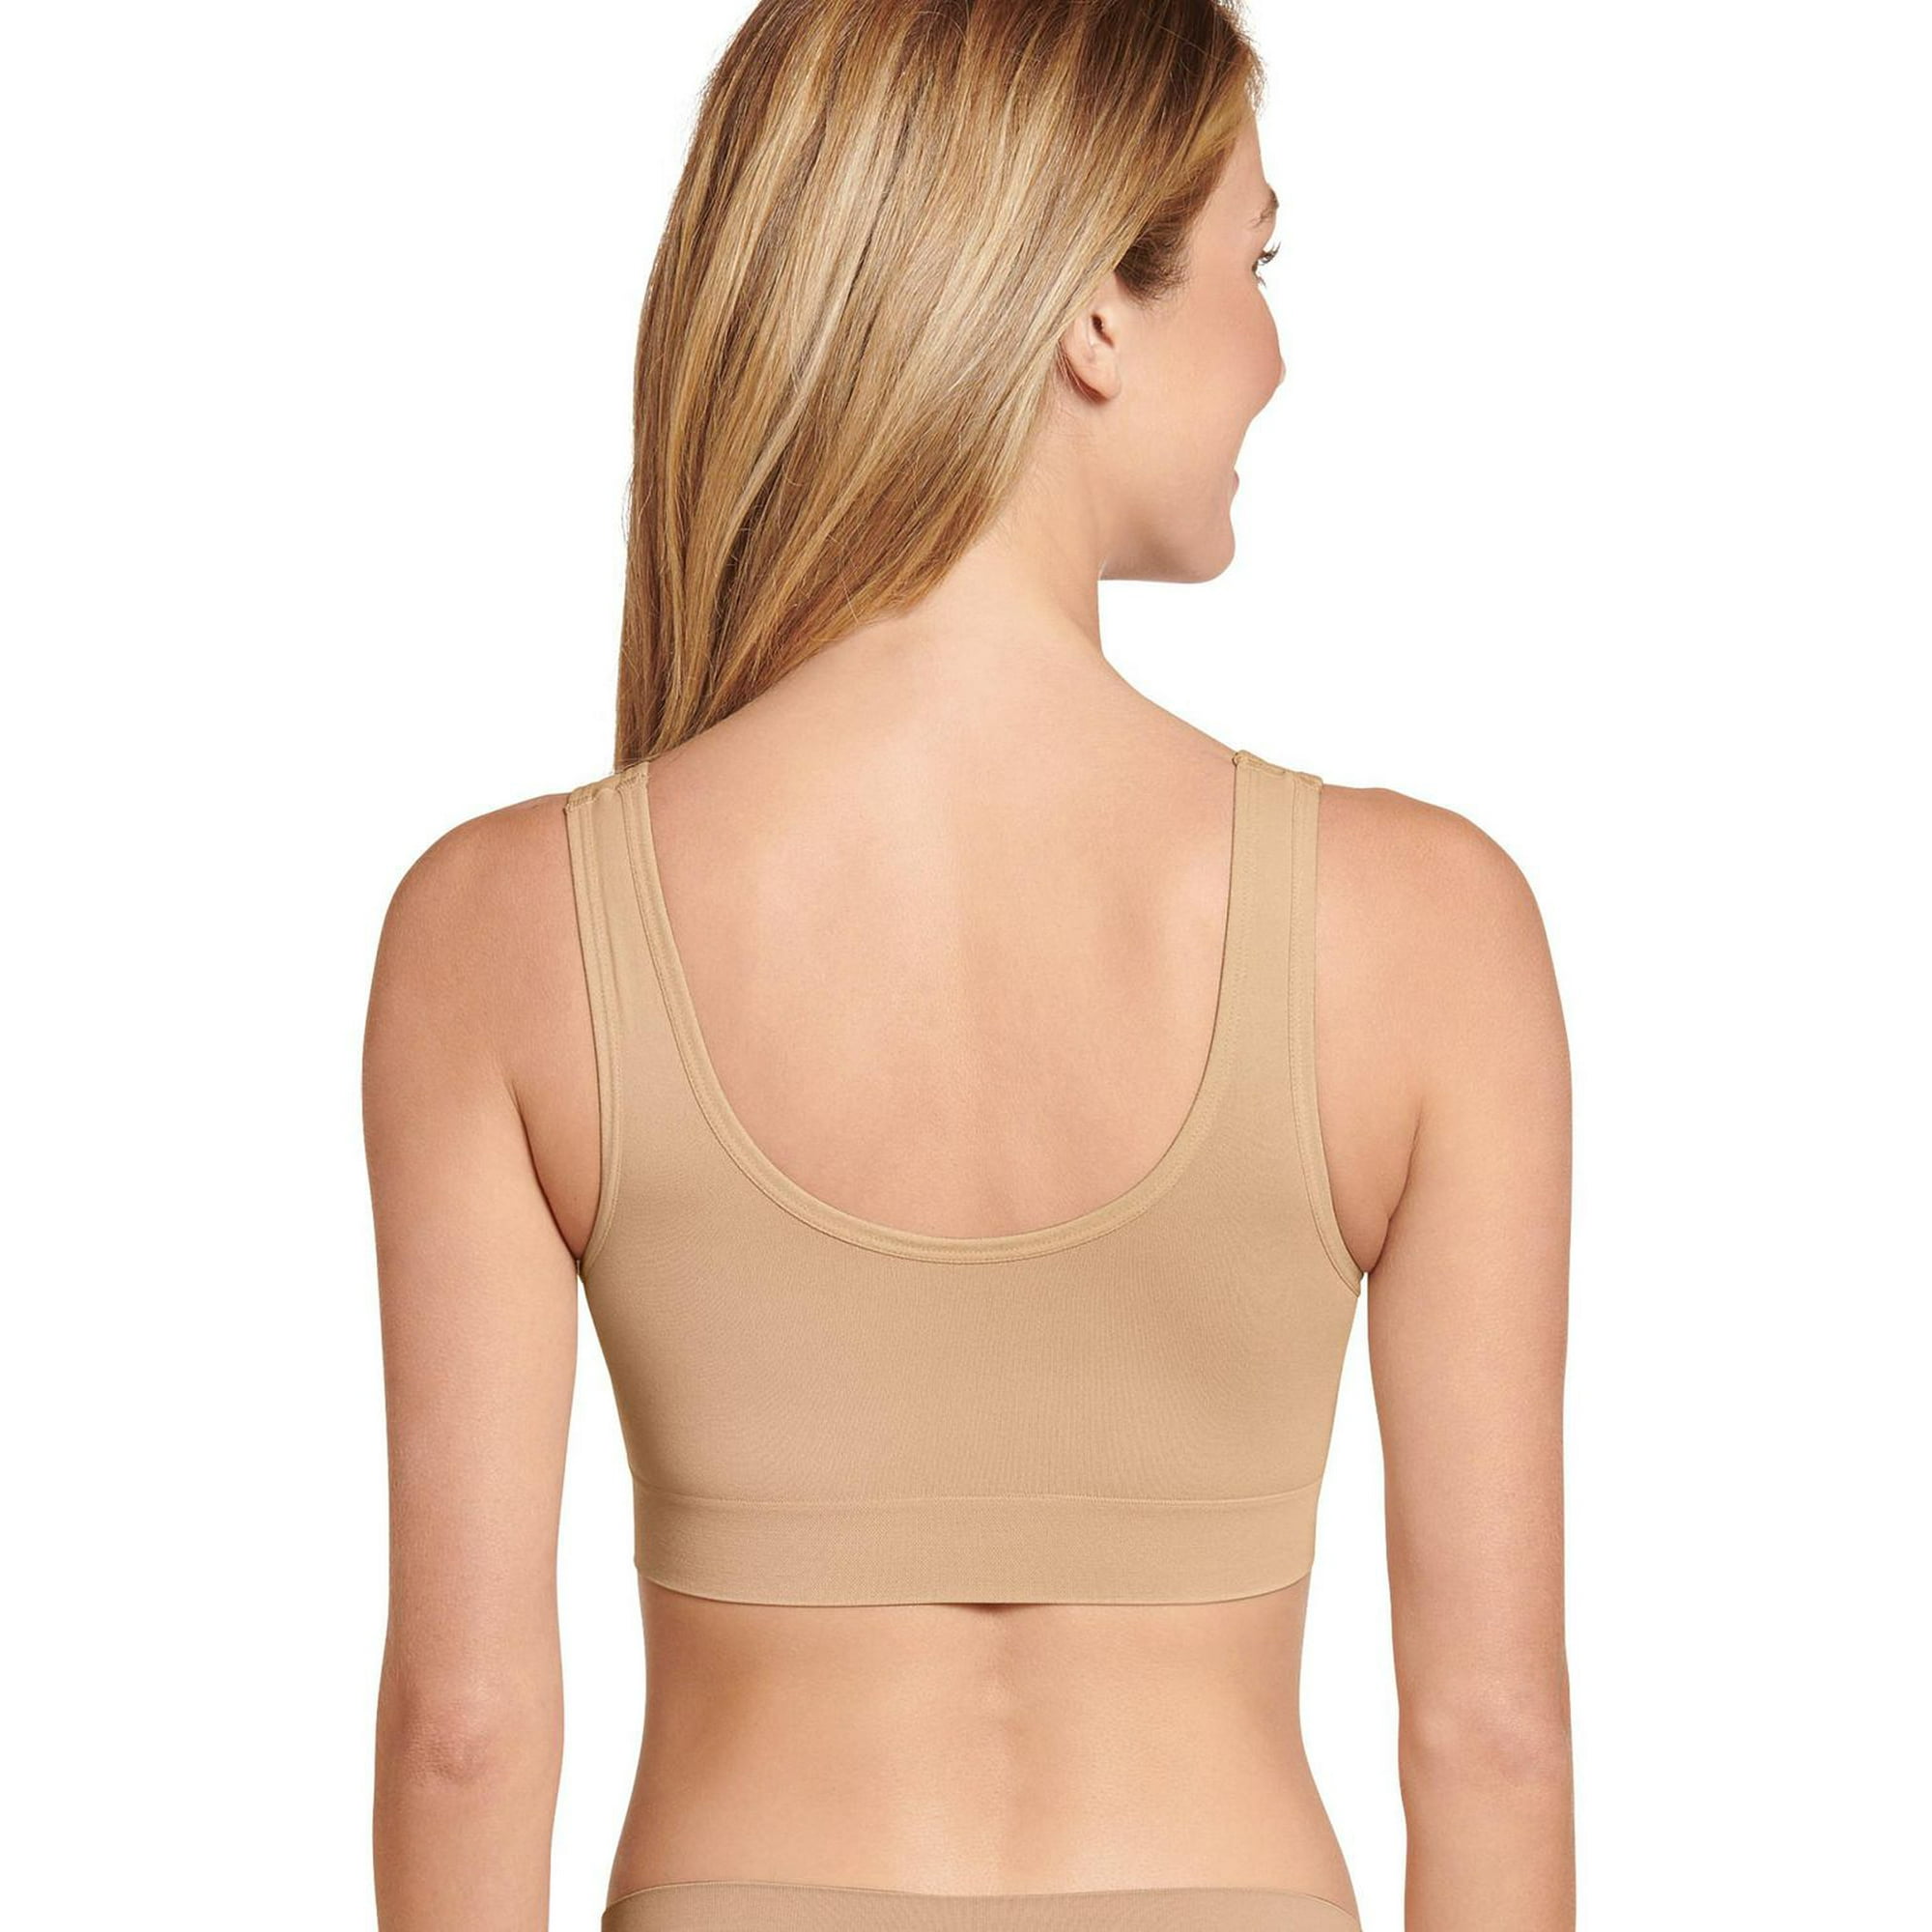 Jockey Sports Bra For Womens - Get Best Price from Manufacturers